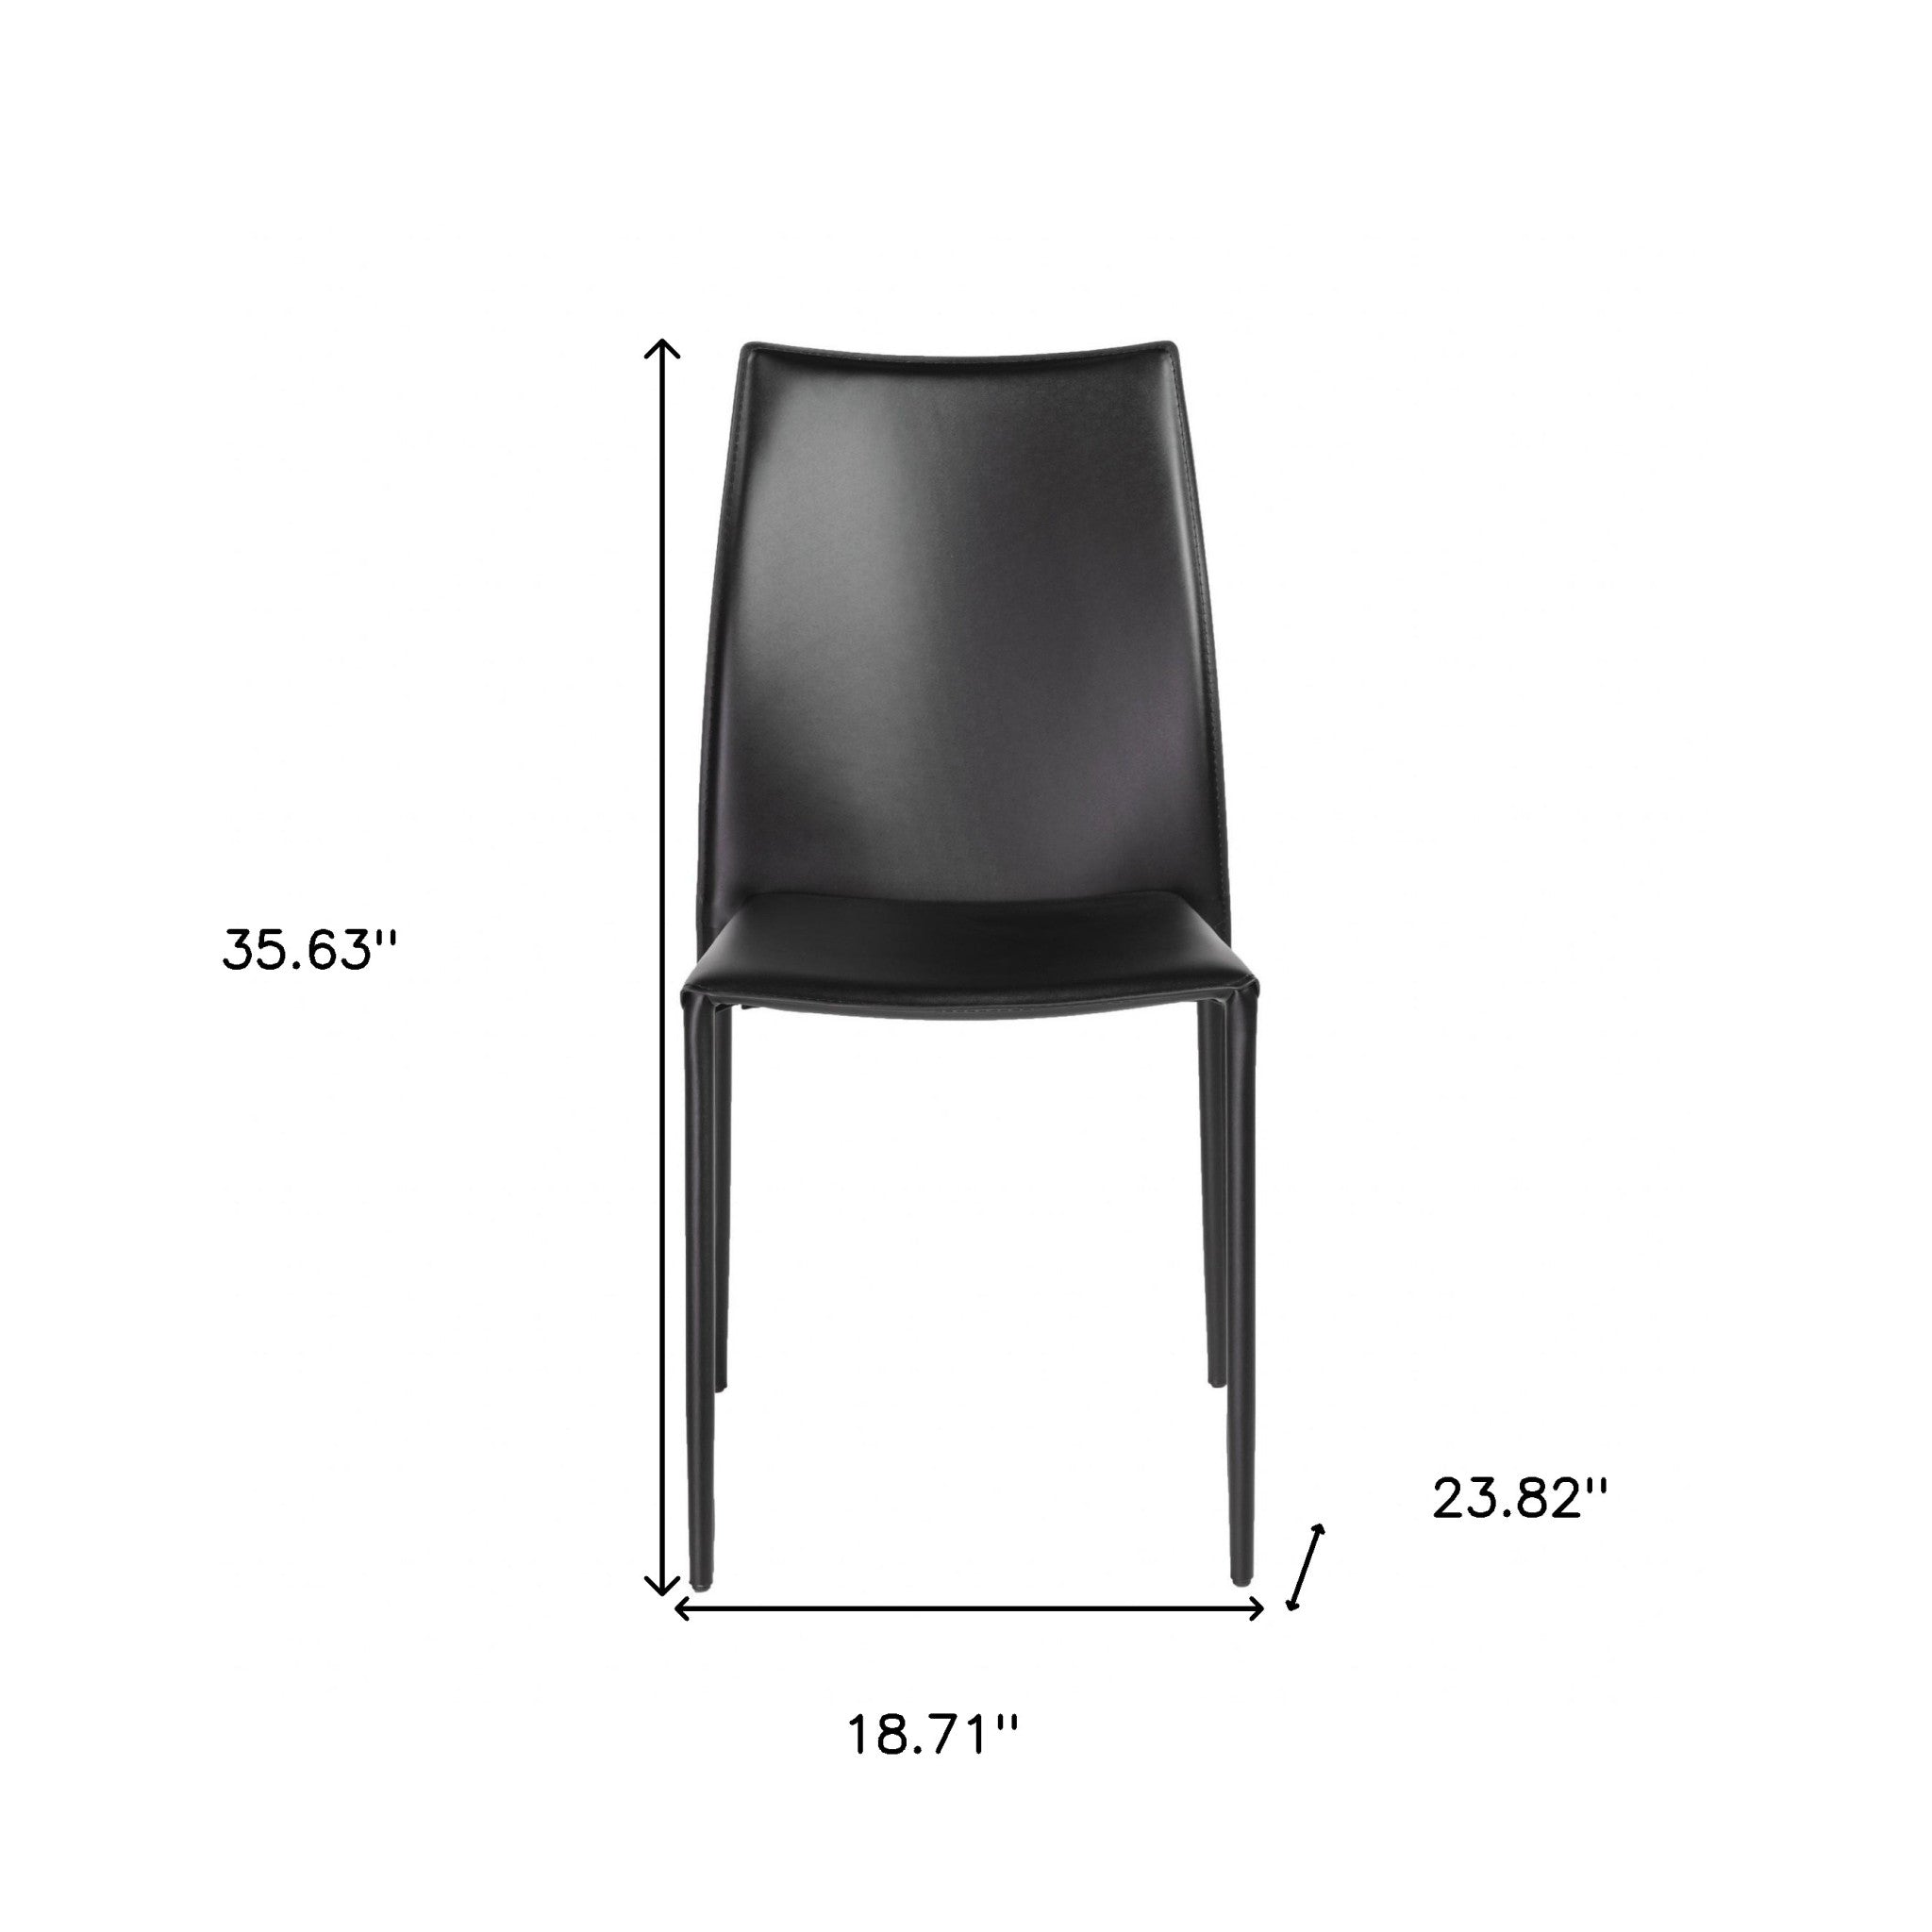 Set of Two Premium All Black Stacking Dining Chairs